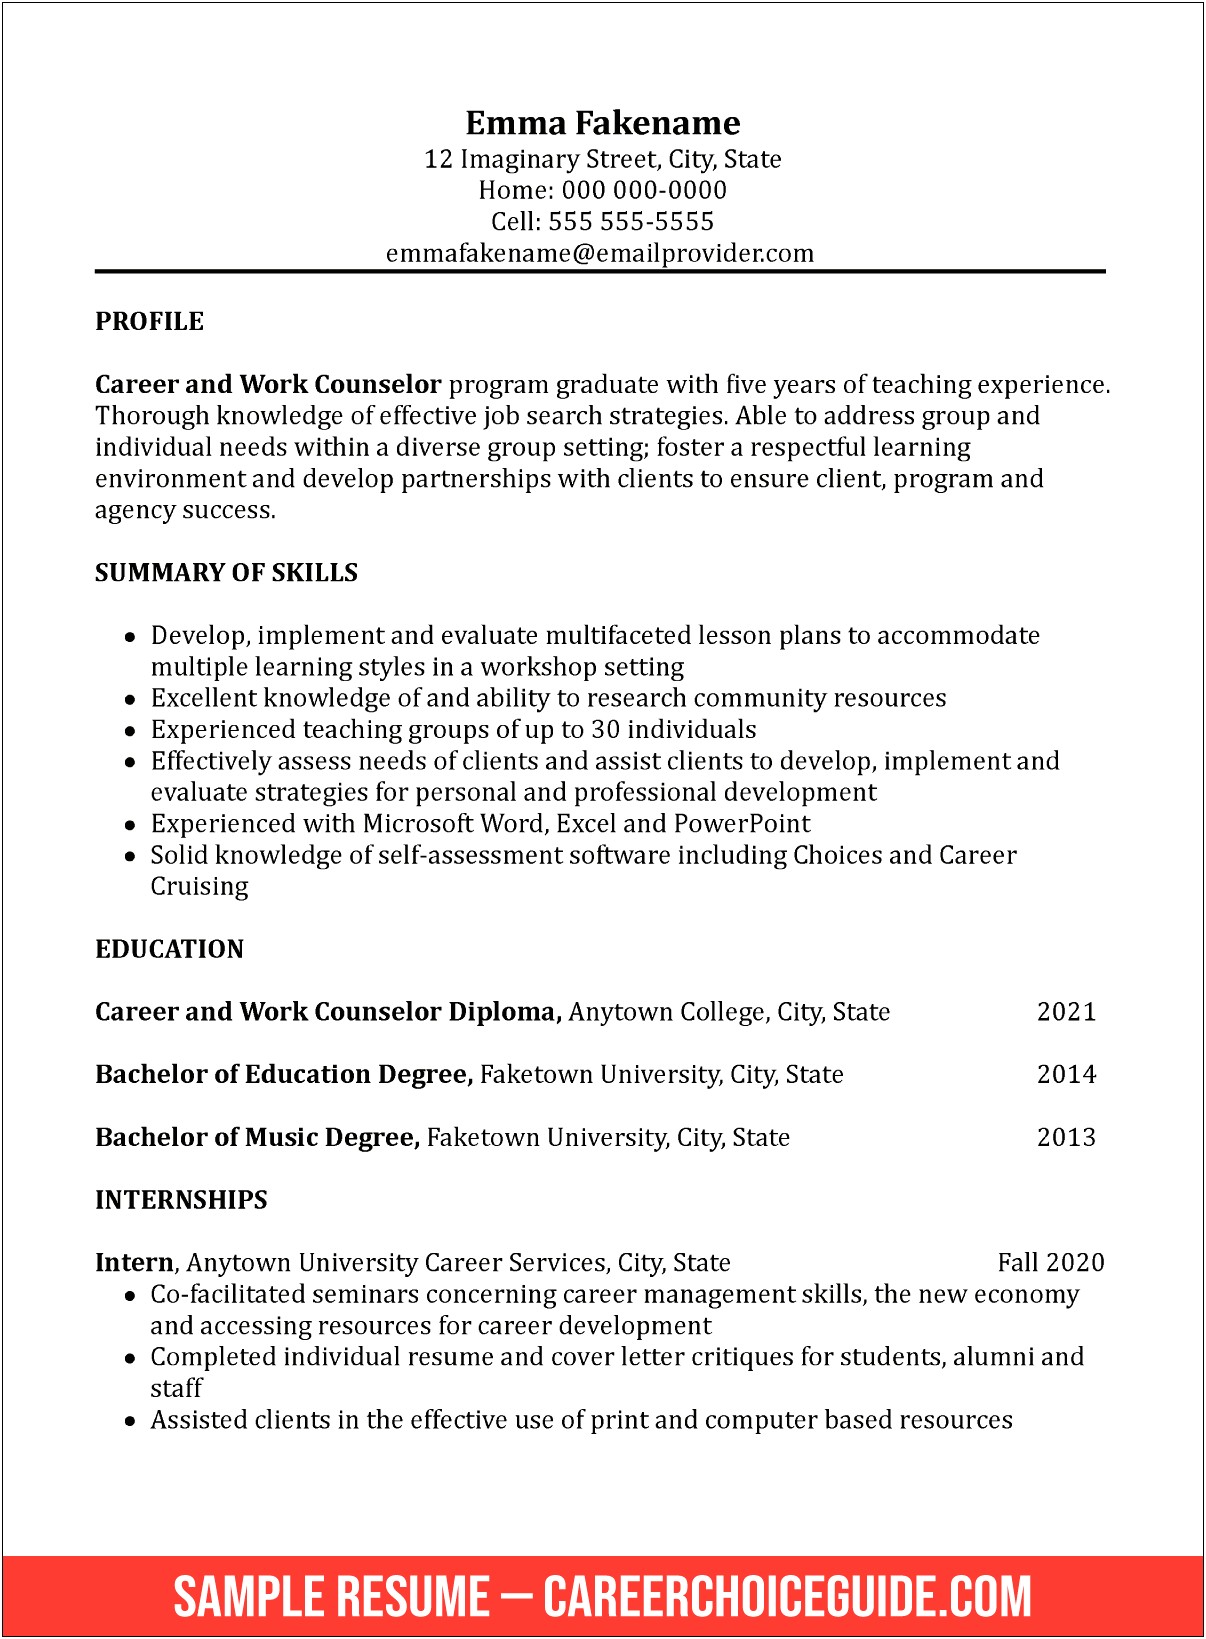 Resume Describe Skills That Transfer From Unrelated Job